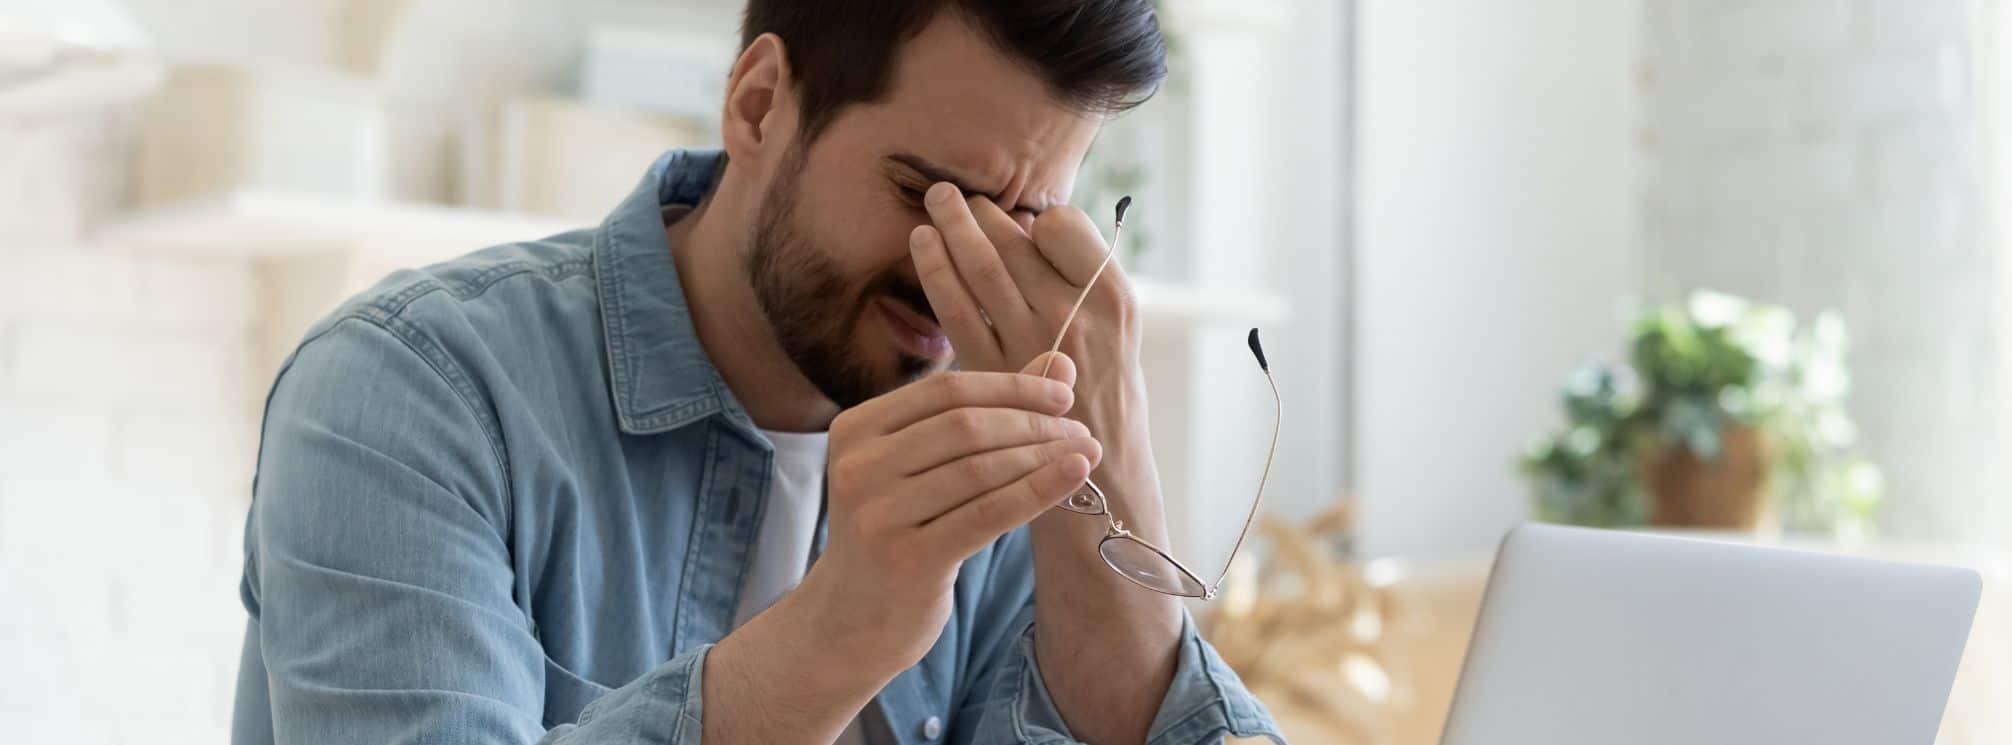 survey fatigue depiction. Man working at his computer with his glasses pulled off and rubbing his eyes.